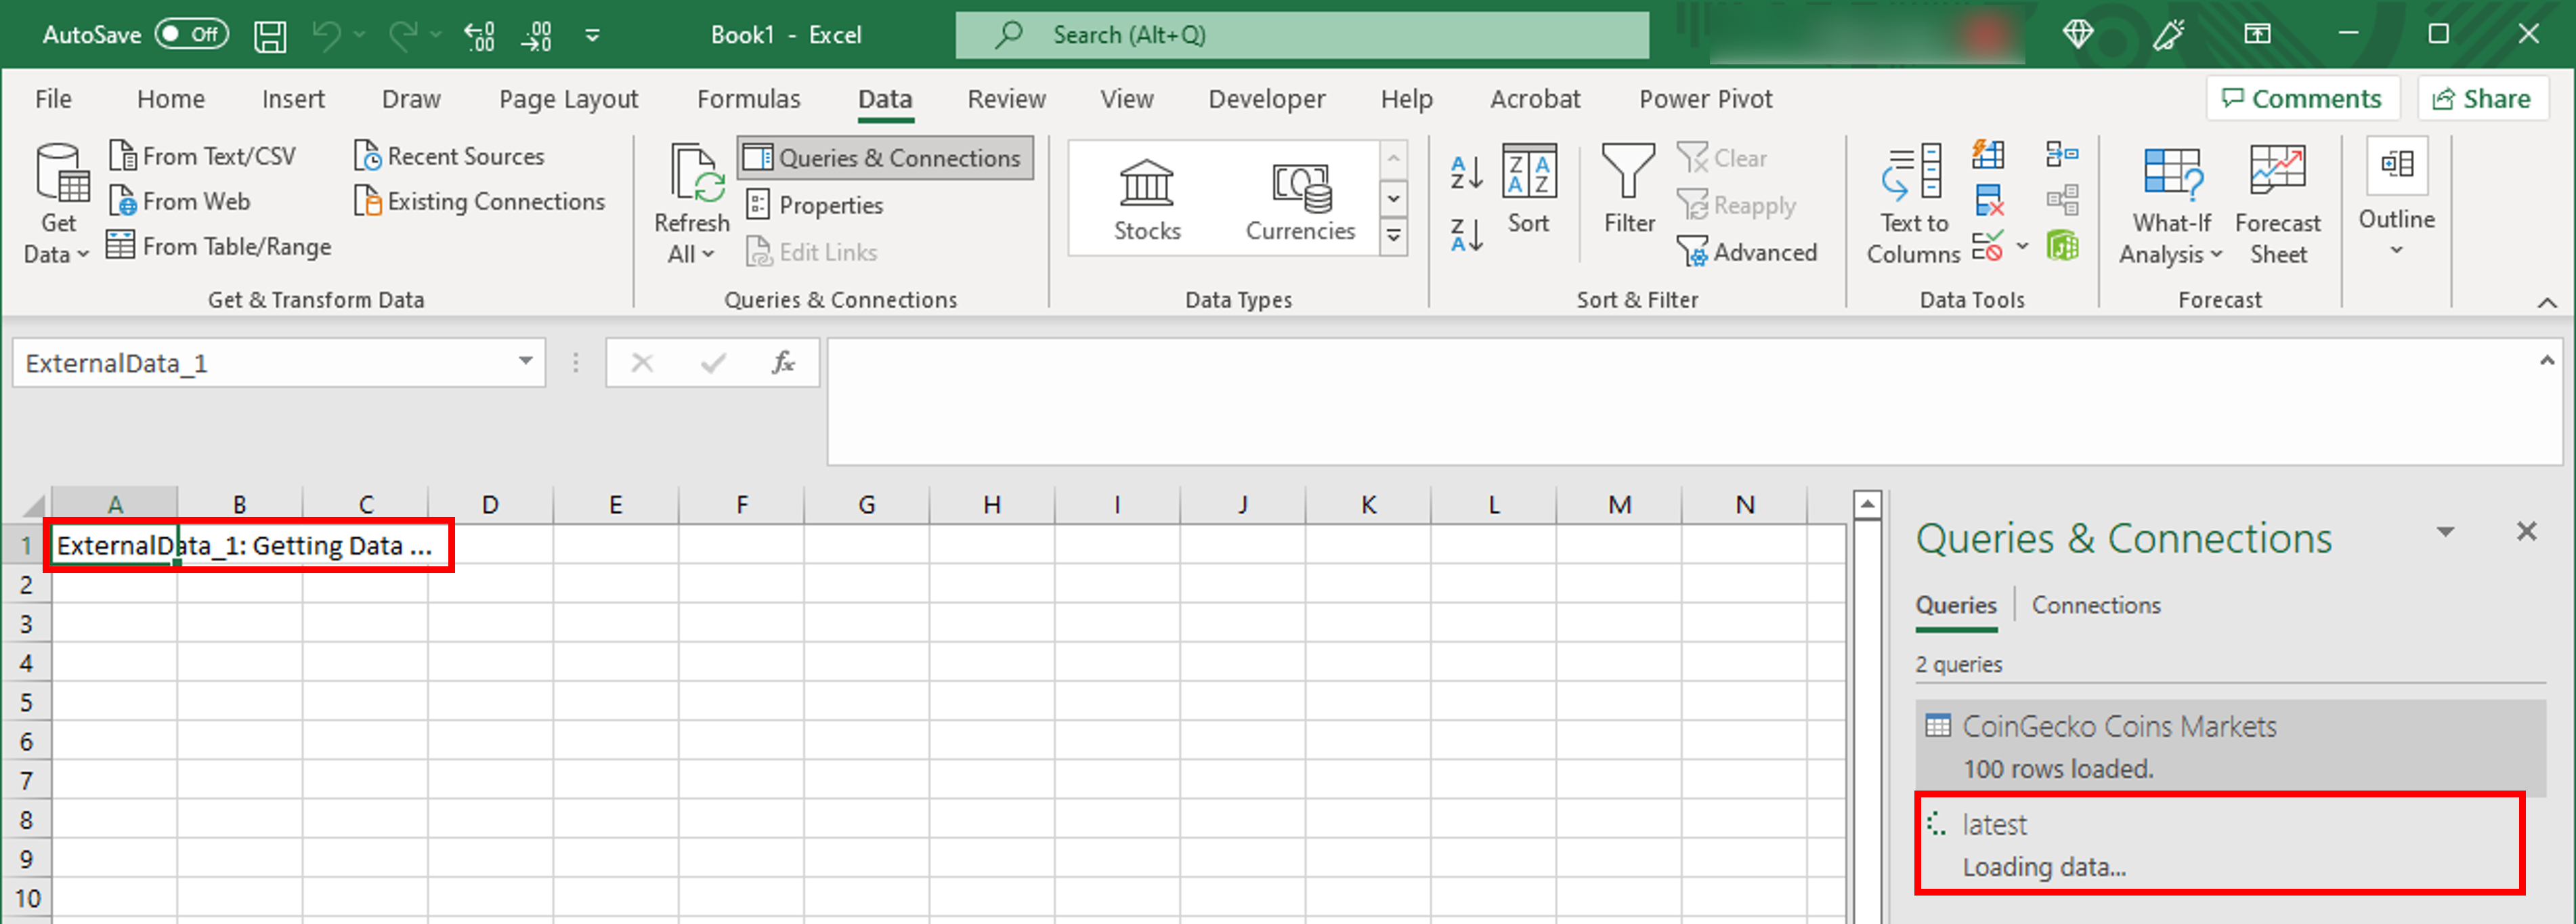 Excel running the query and fetching the requested data